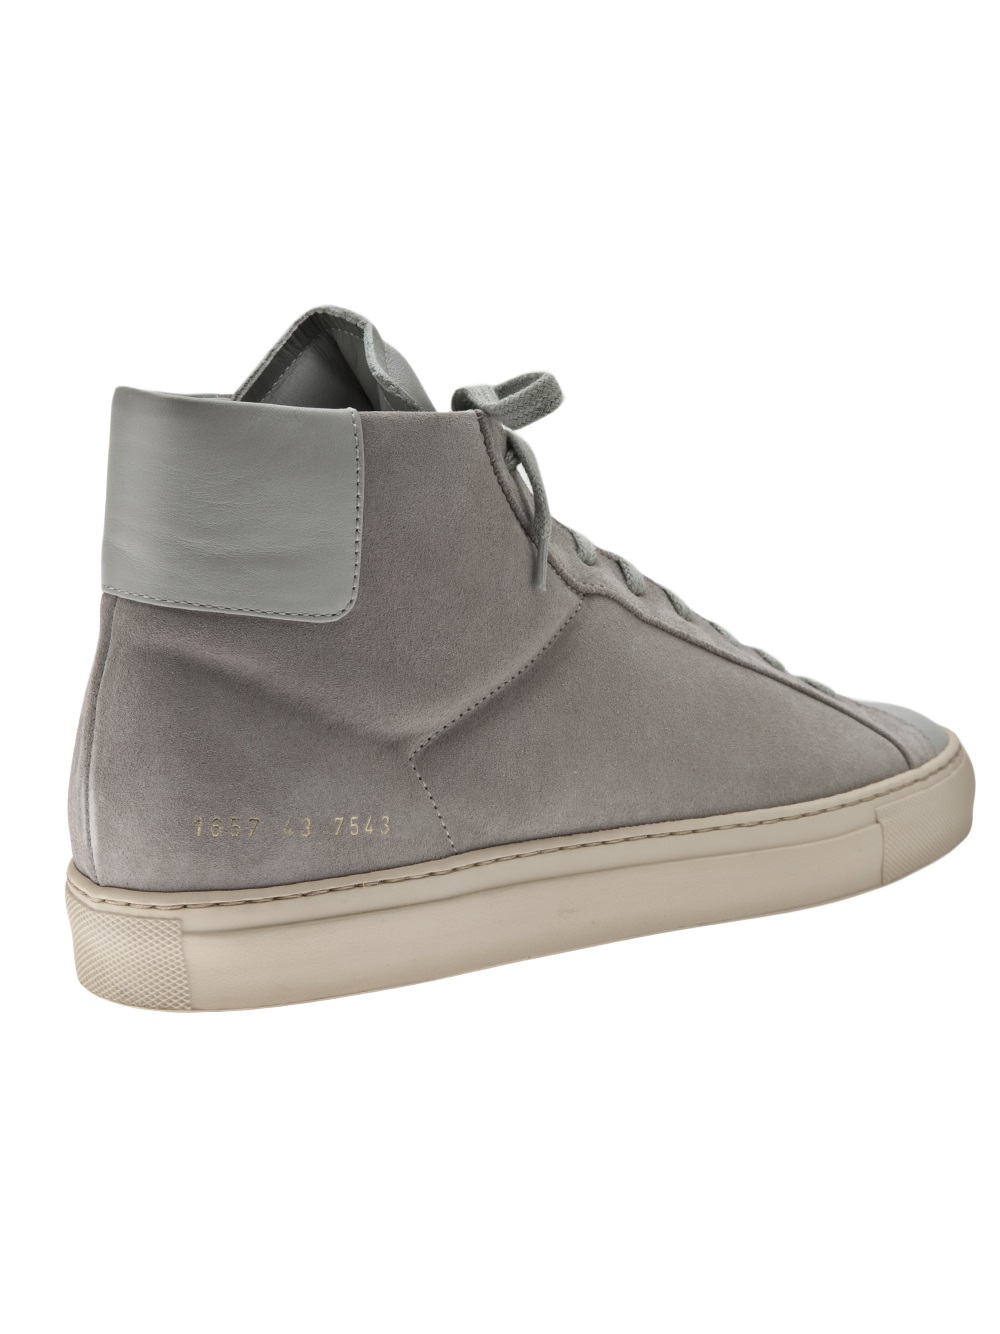 Common Projects High Top Sneaker in Gray for Men - Lyst